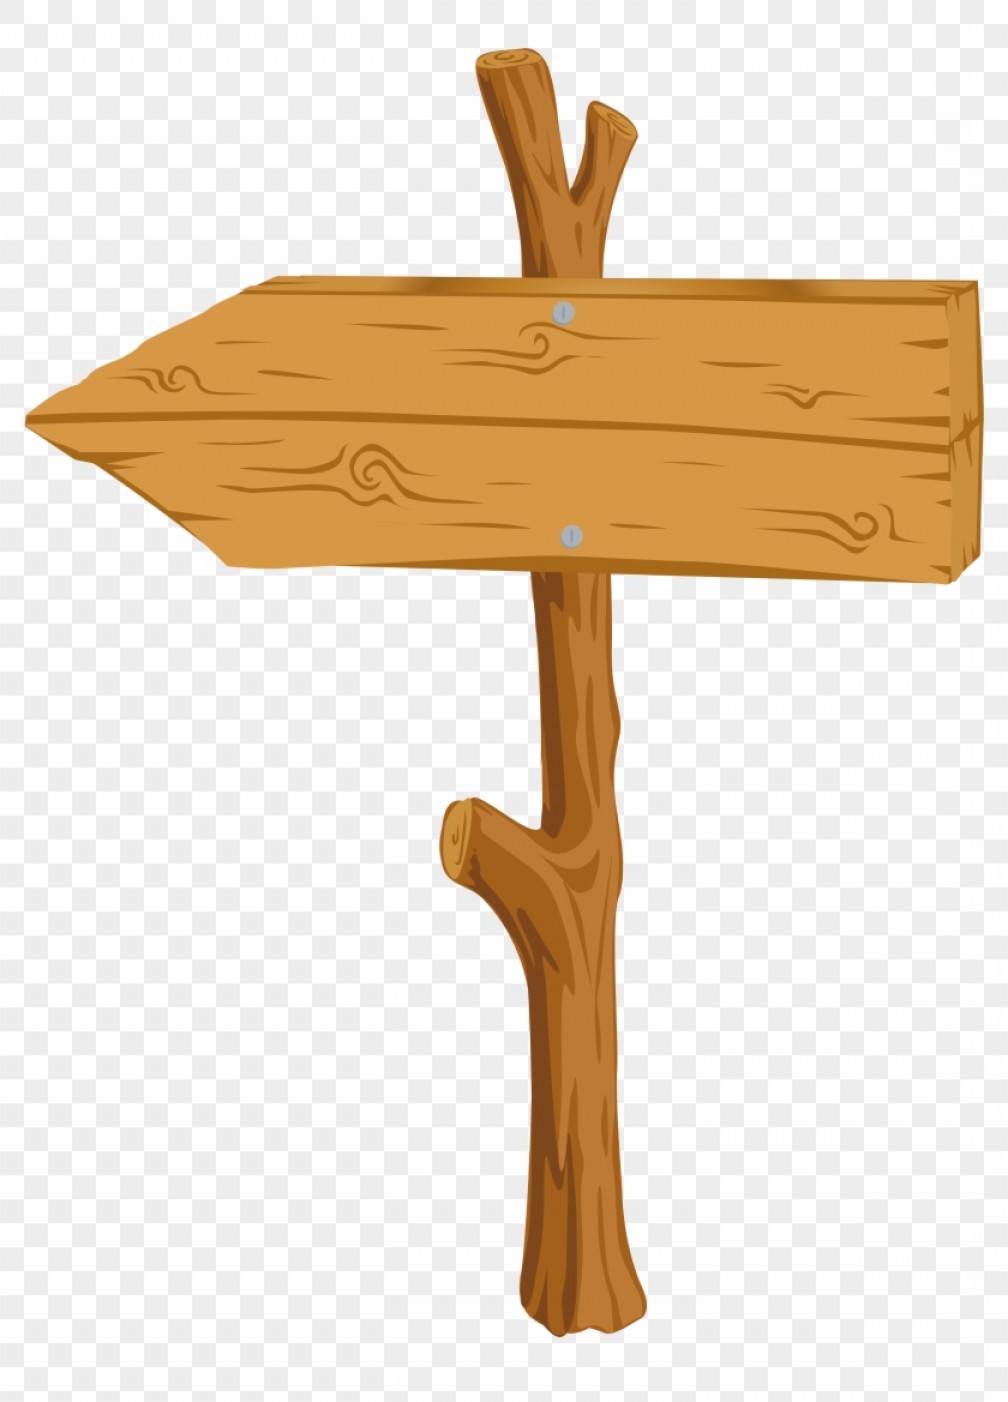 Download Wooden Sign Vector Free at Vectorified.com | Collection of ...